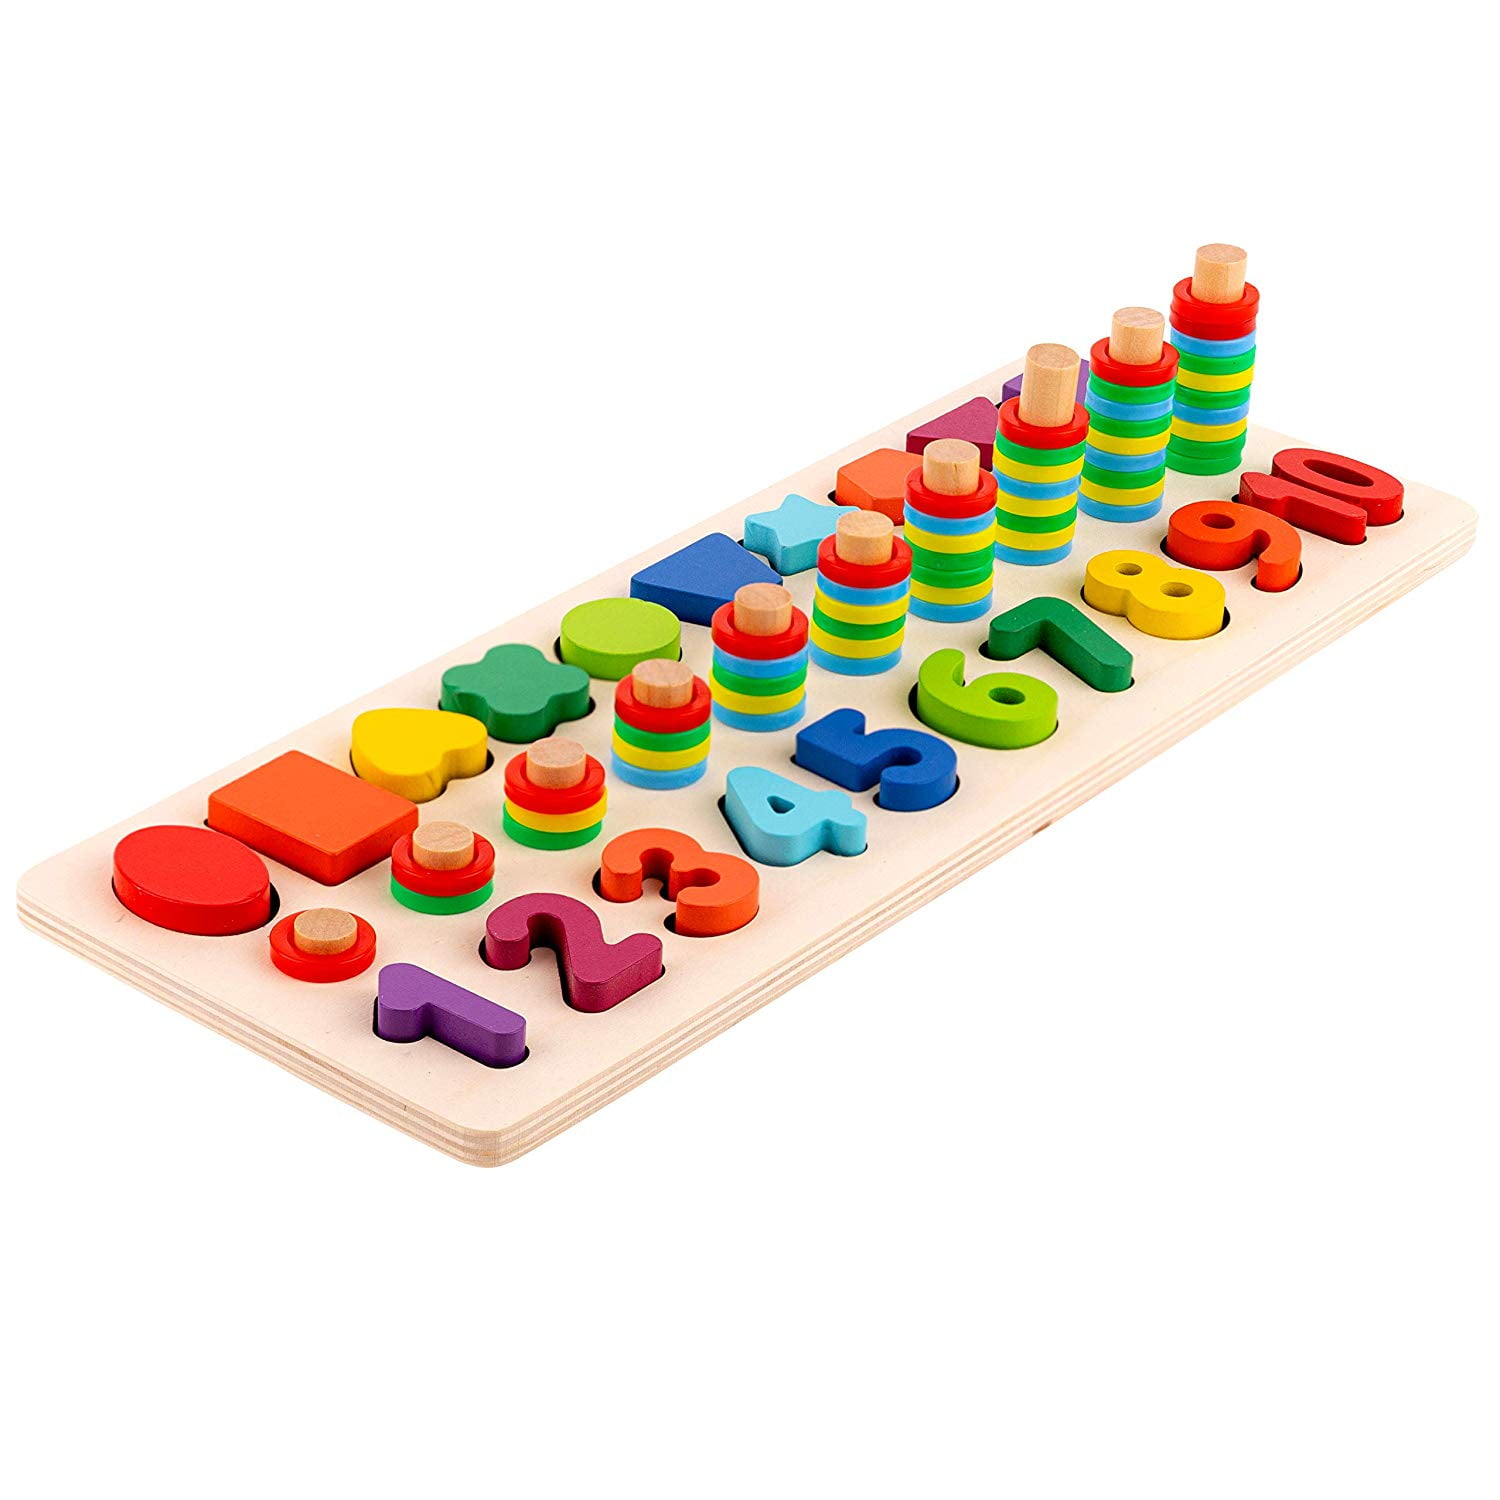 HiKid Toy Park Ponny Wooden Stacking Rings Puzzles Shape Sorter Toys Preschool Educational Number Learning Tools for Children 